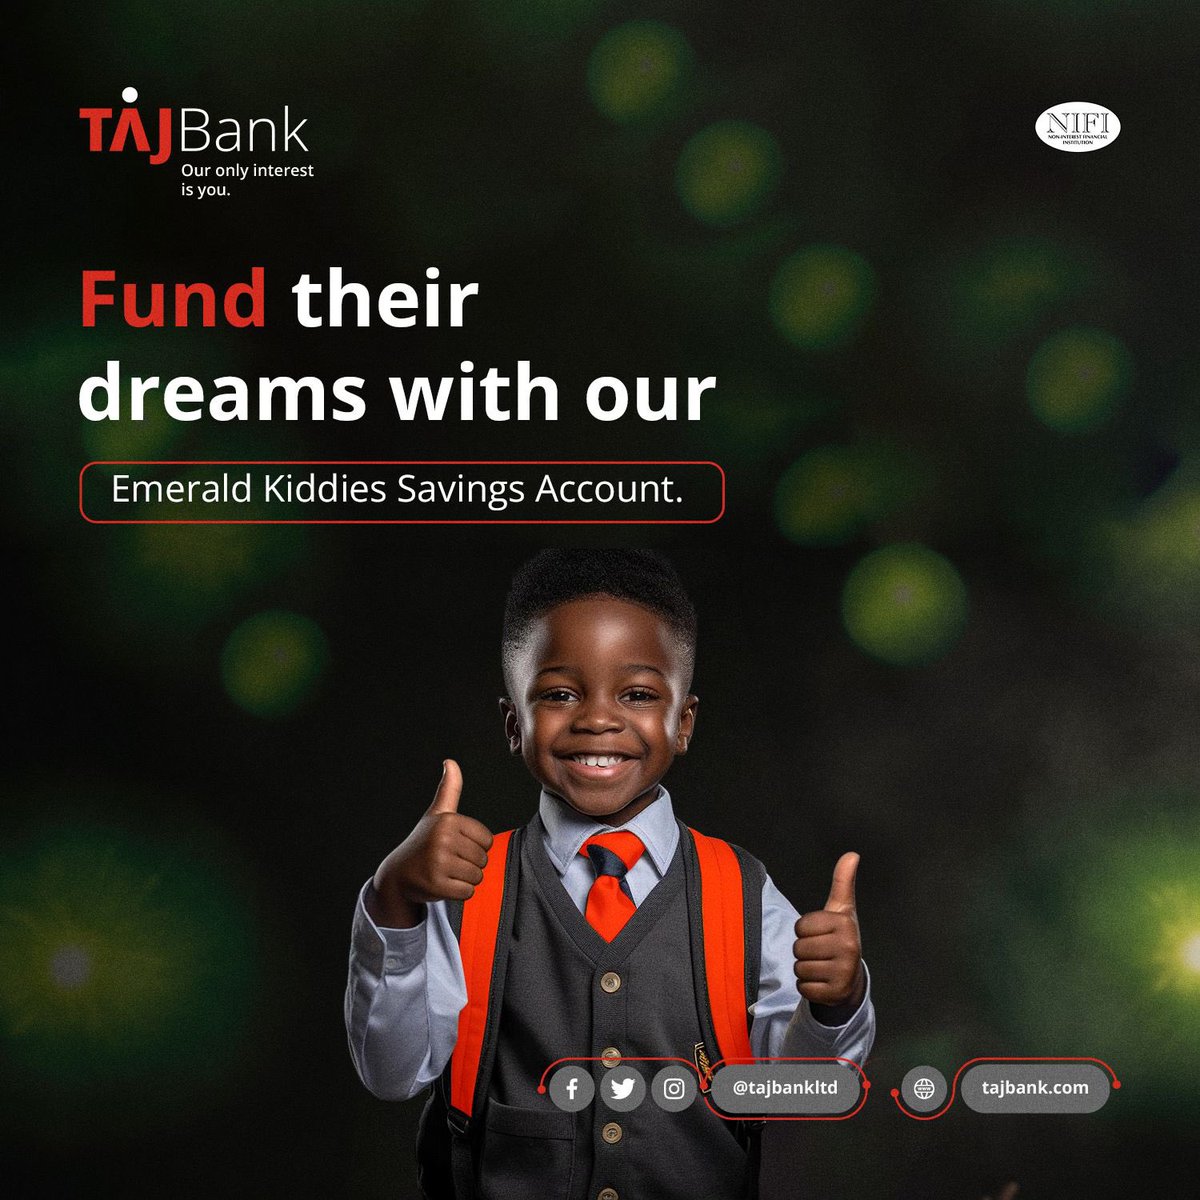 HAPPY CHILDREN’s DAY. From all of us @TAJBankLtd